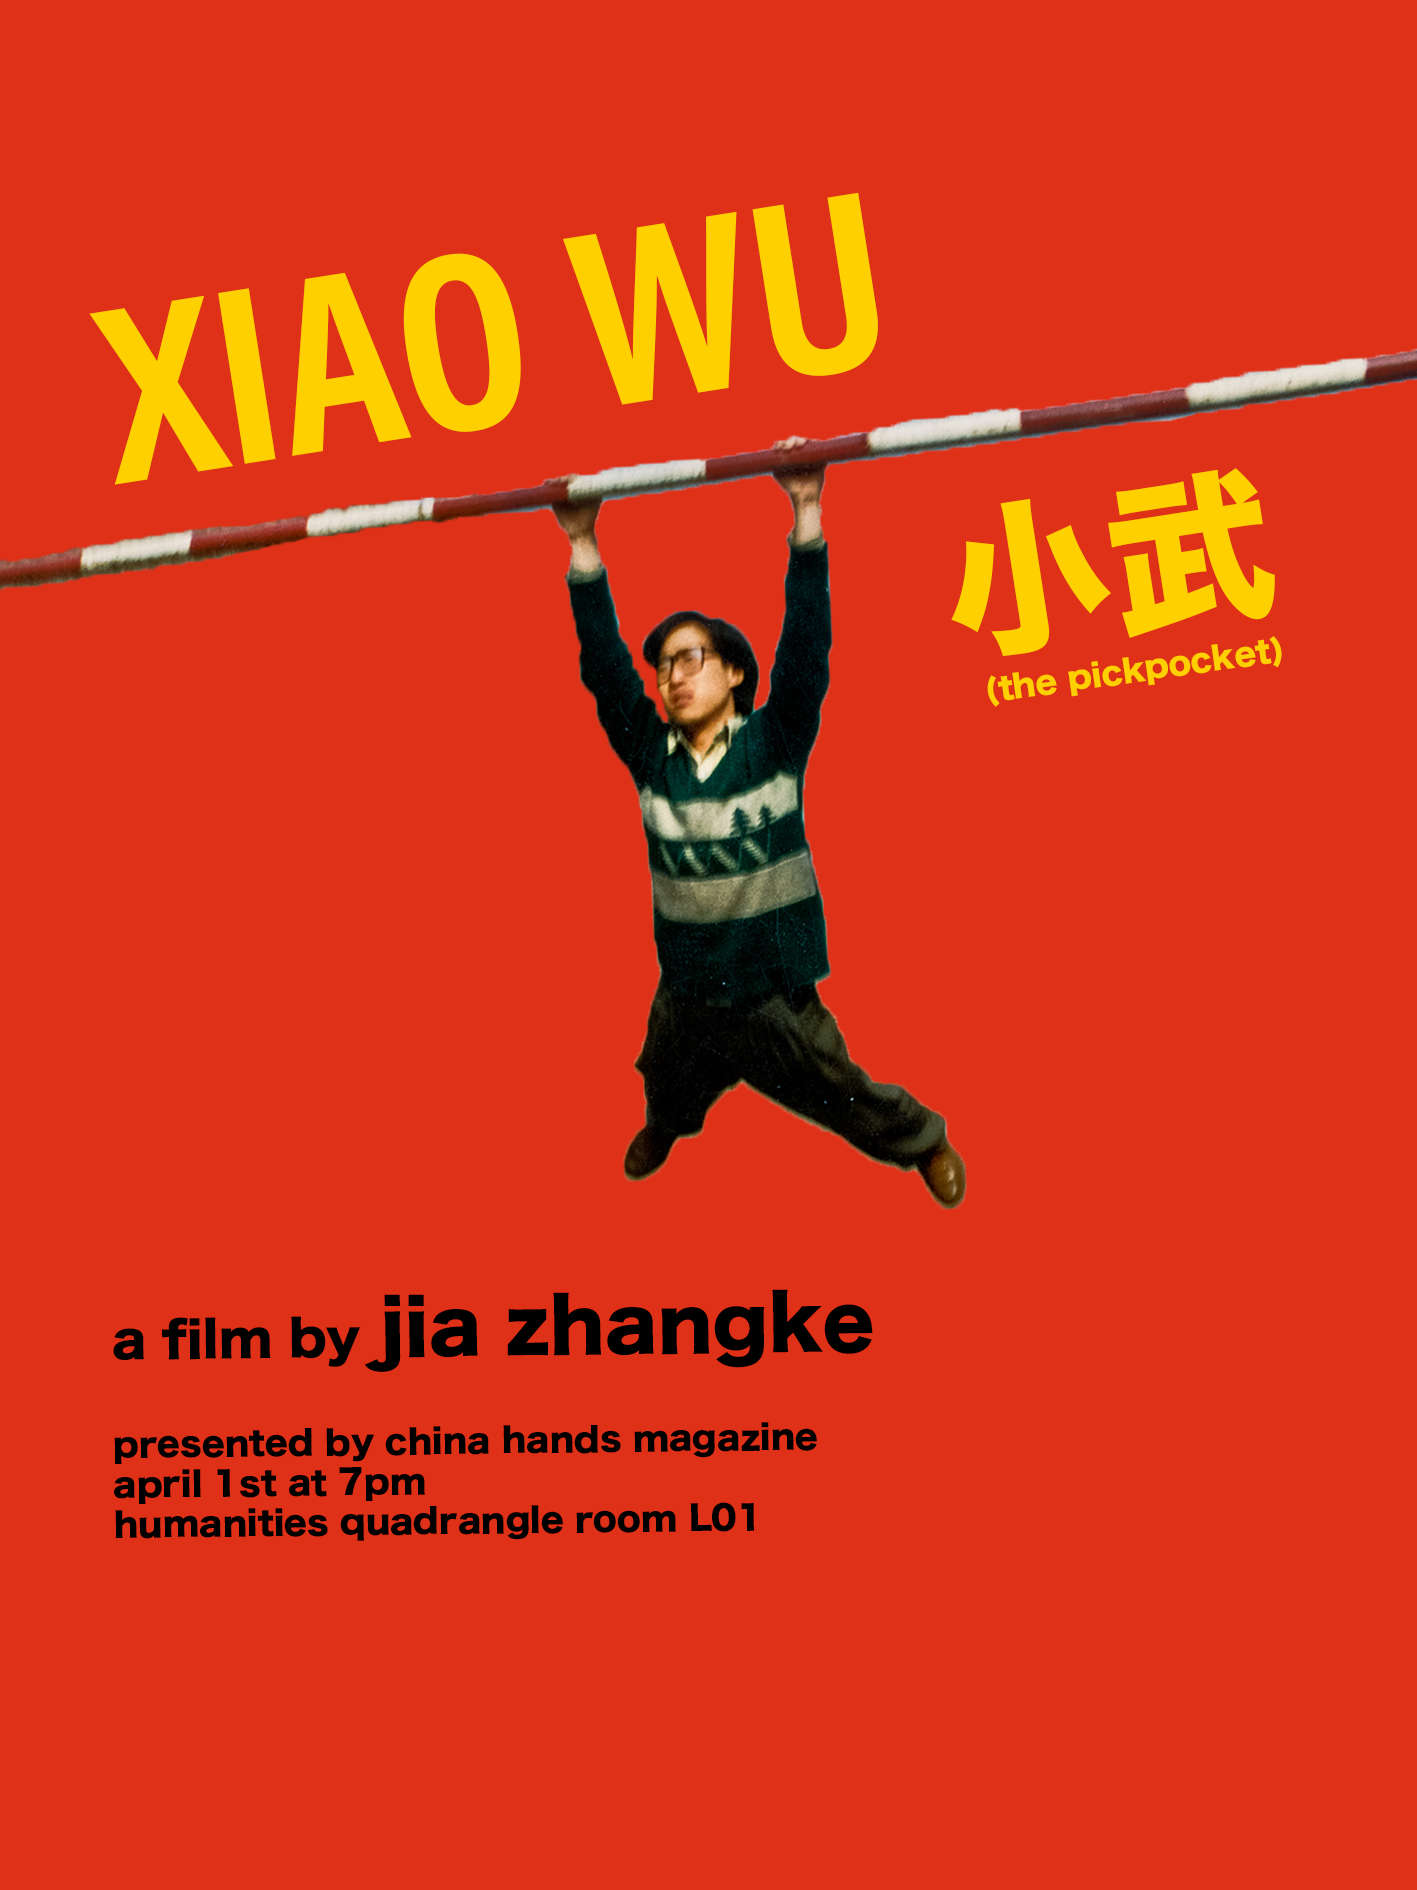 “Xiao Wu”: The Cacophony of Alienation